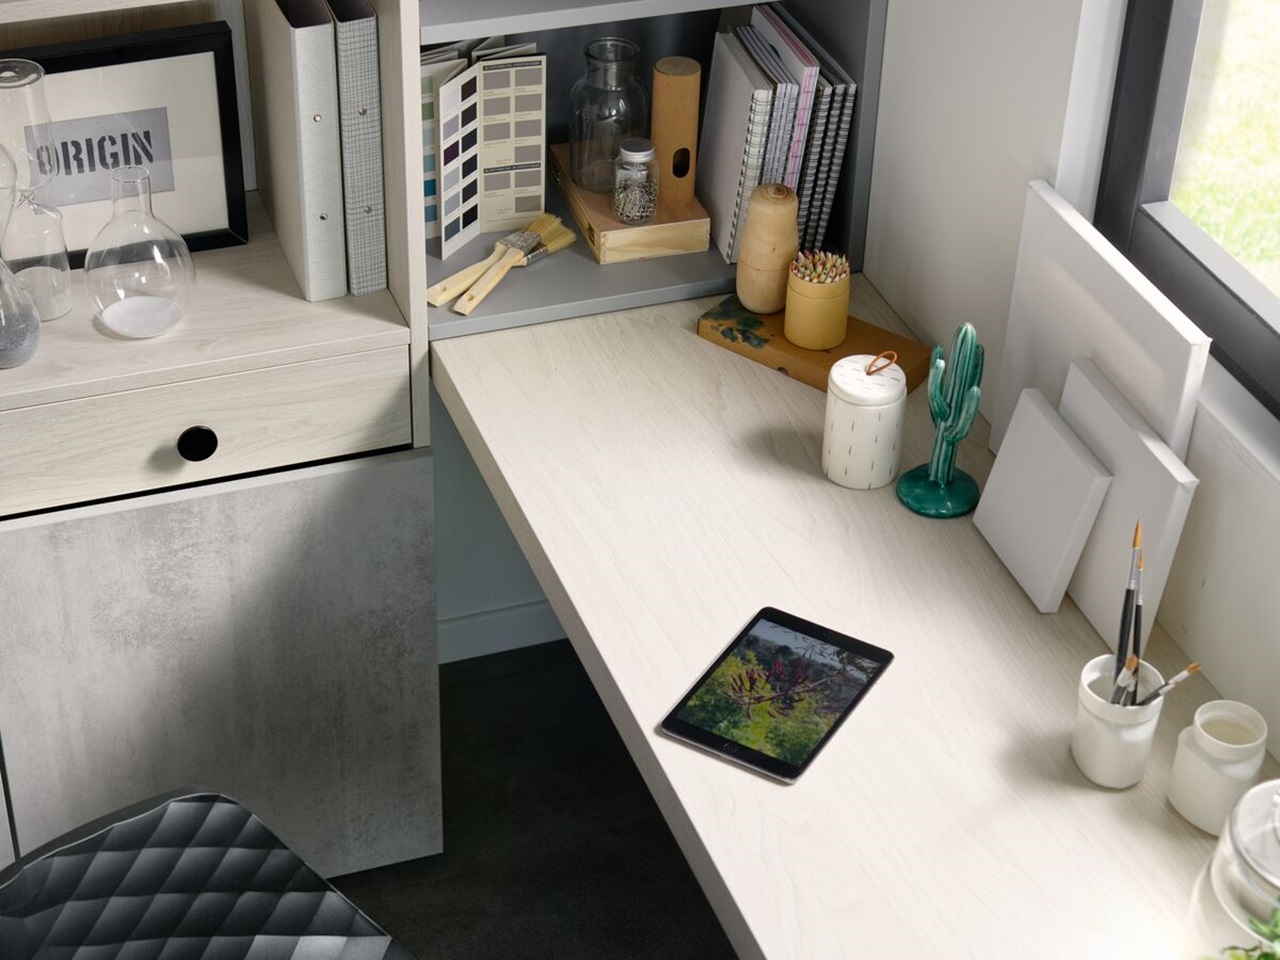 Desk area with work surface that is ideal for remote working and creative leisure activities